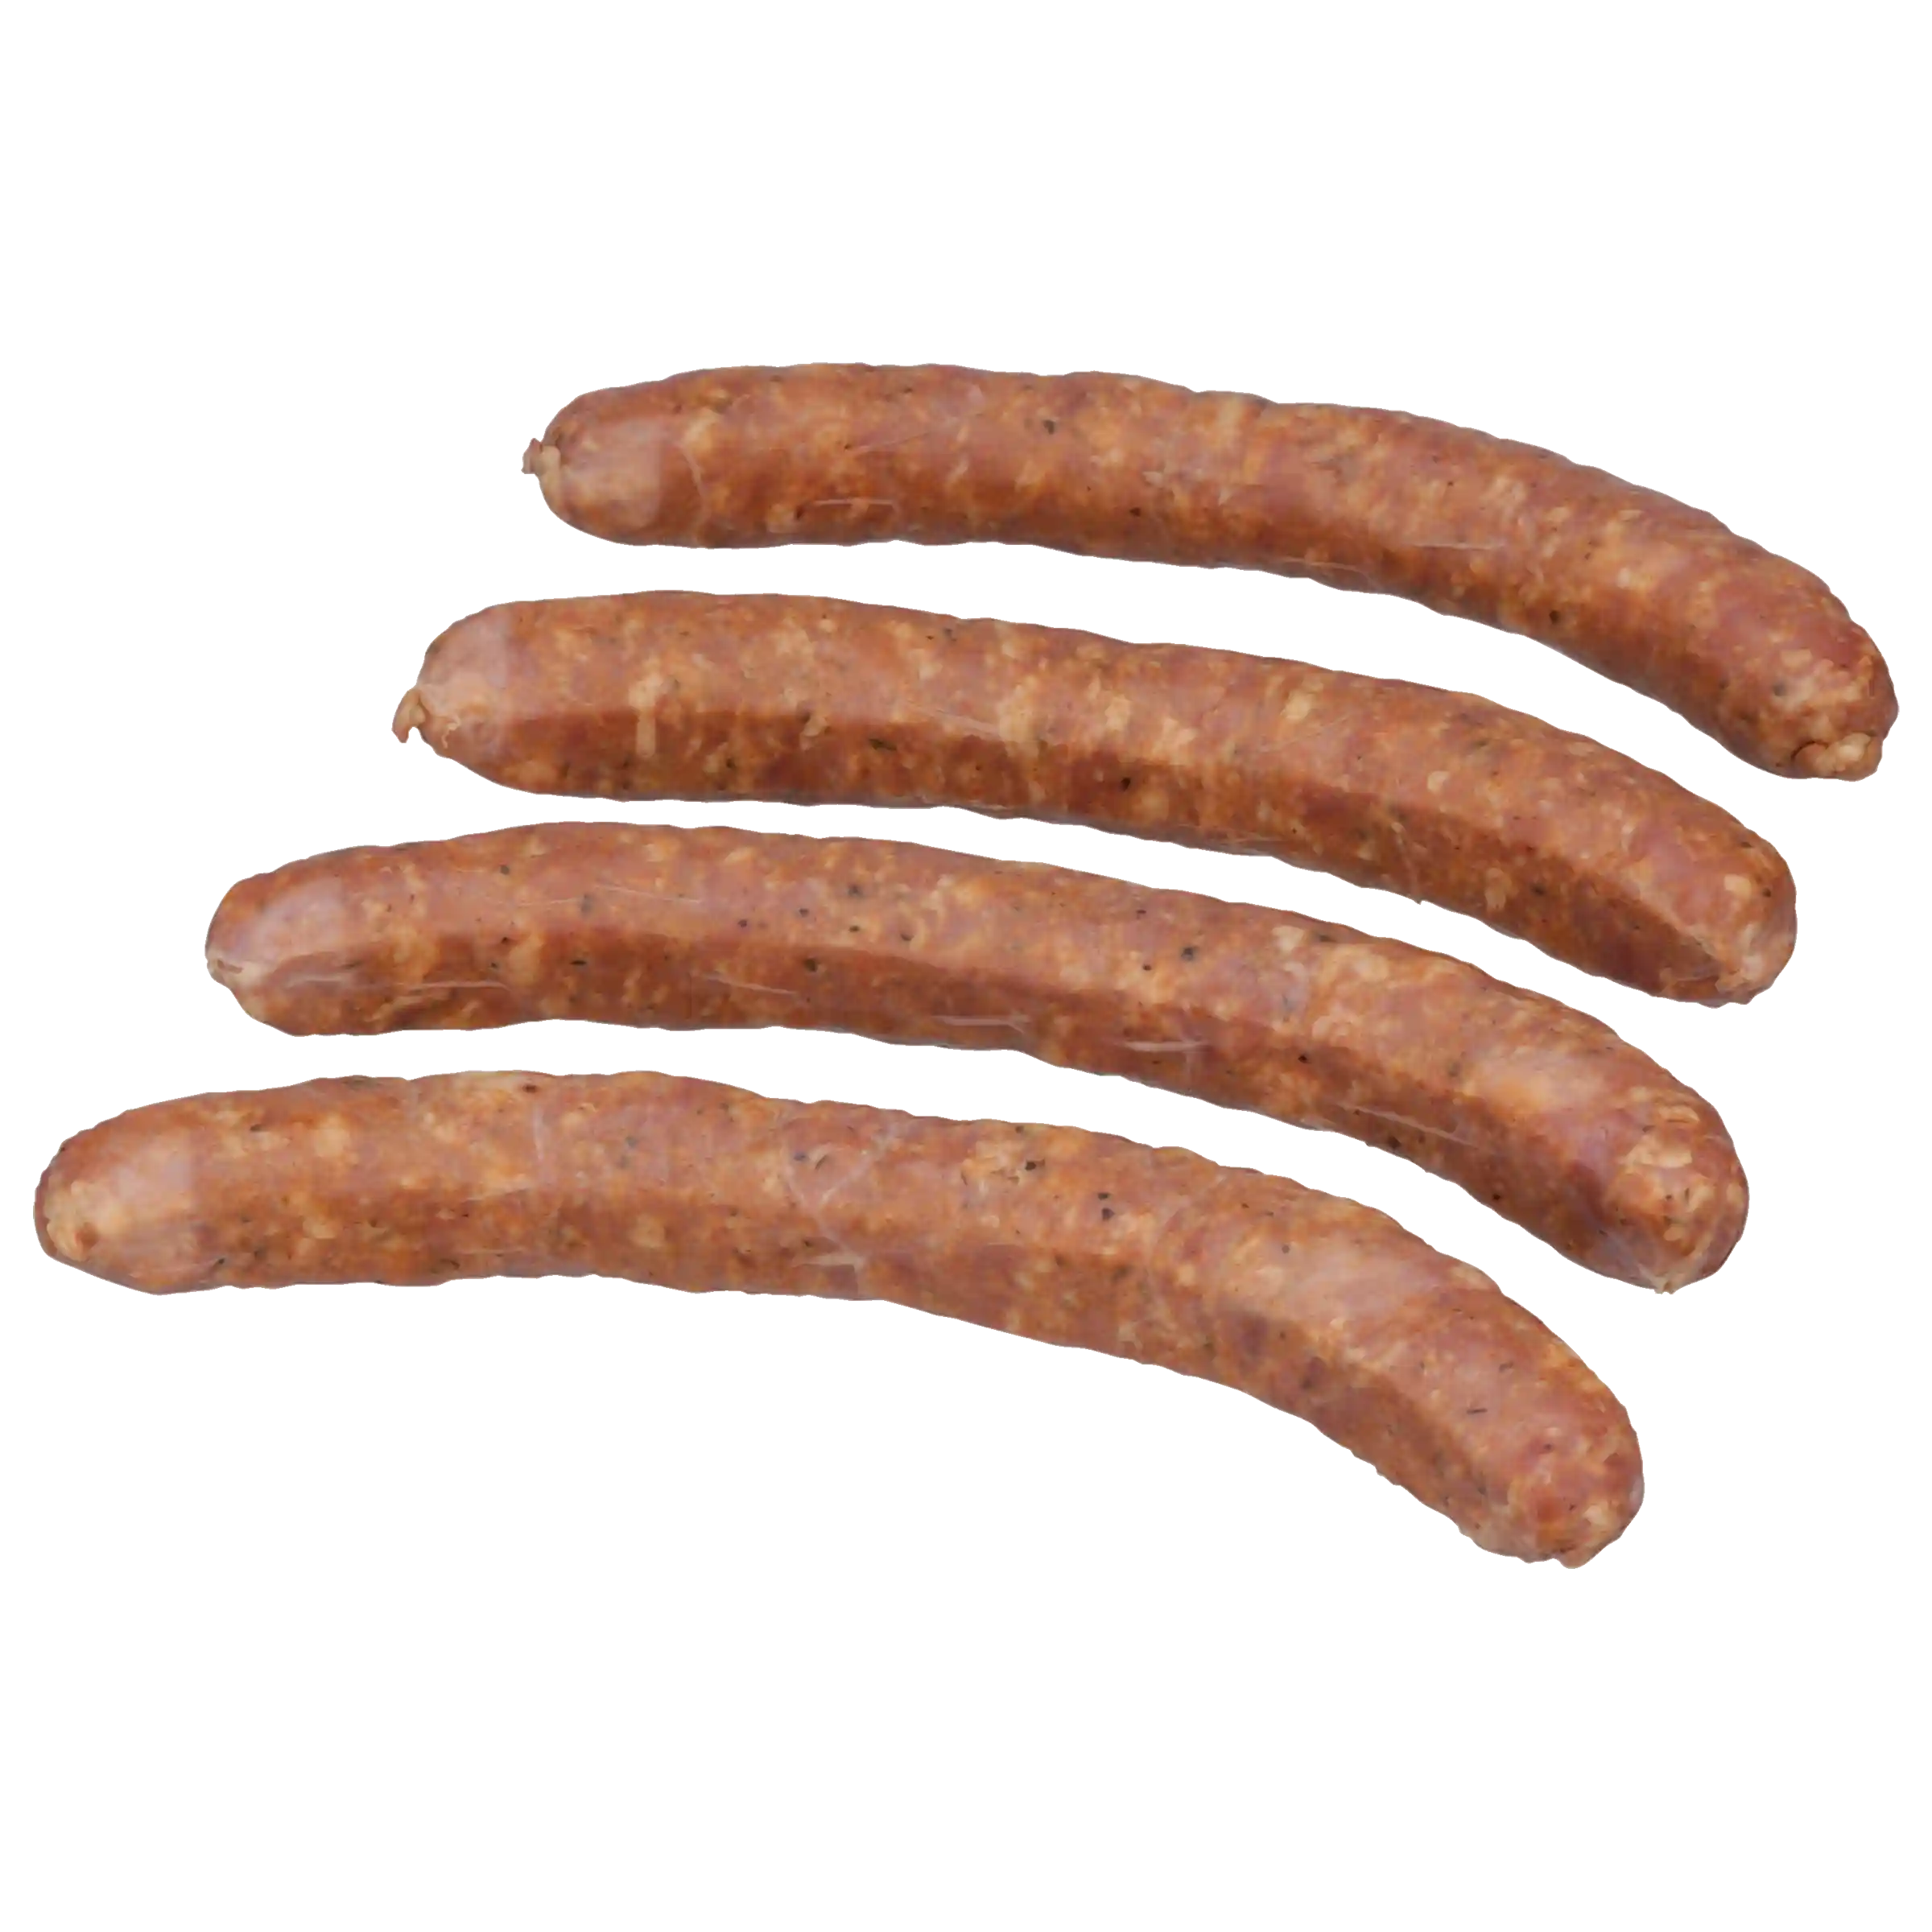 Aidells® Fully Cooked Smoked Cajun-Style Andouille Pork Sausage, 2 oz, 128 Links per Case, 16 Lbs, Frozen_image_11